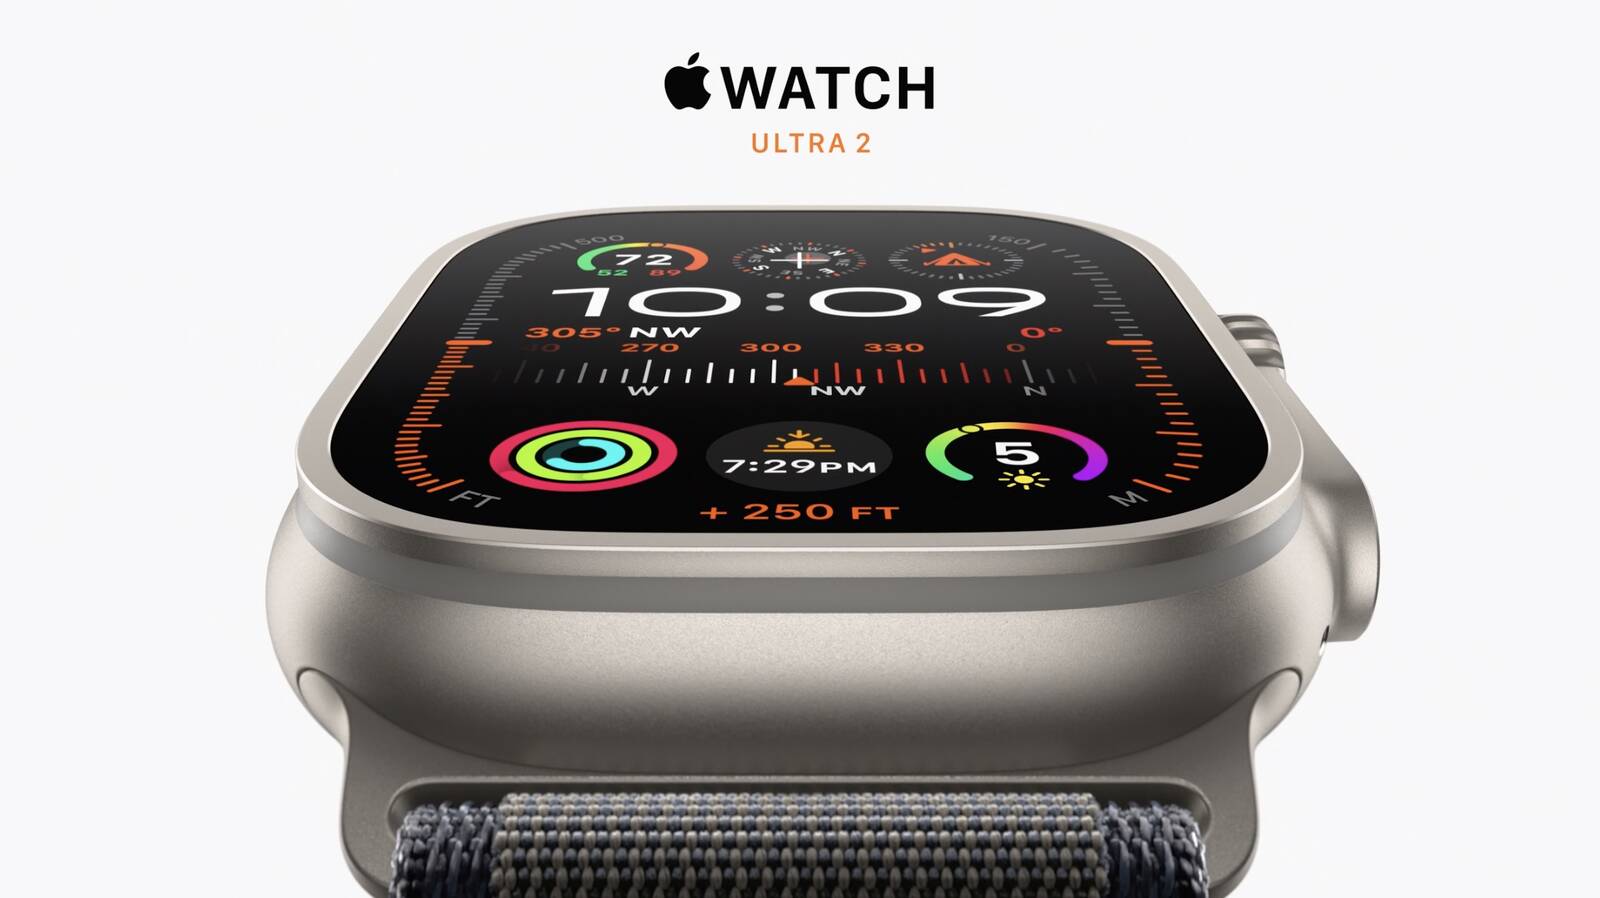 Apple Unveils Apple Watch Ultra 2 Featuring Faster S9 Chip, New Ultra Wideband Chip, and Brighter Display